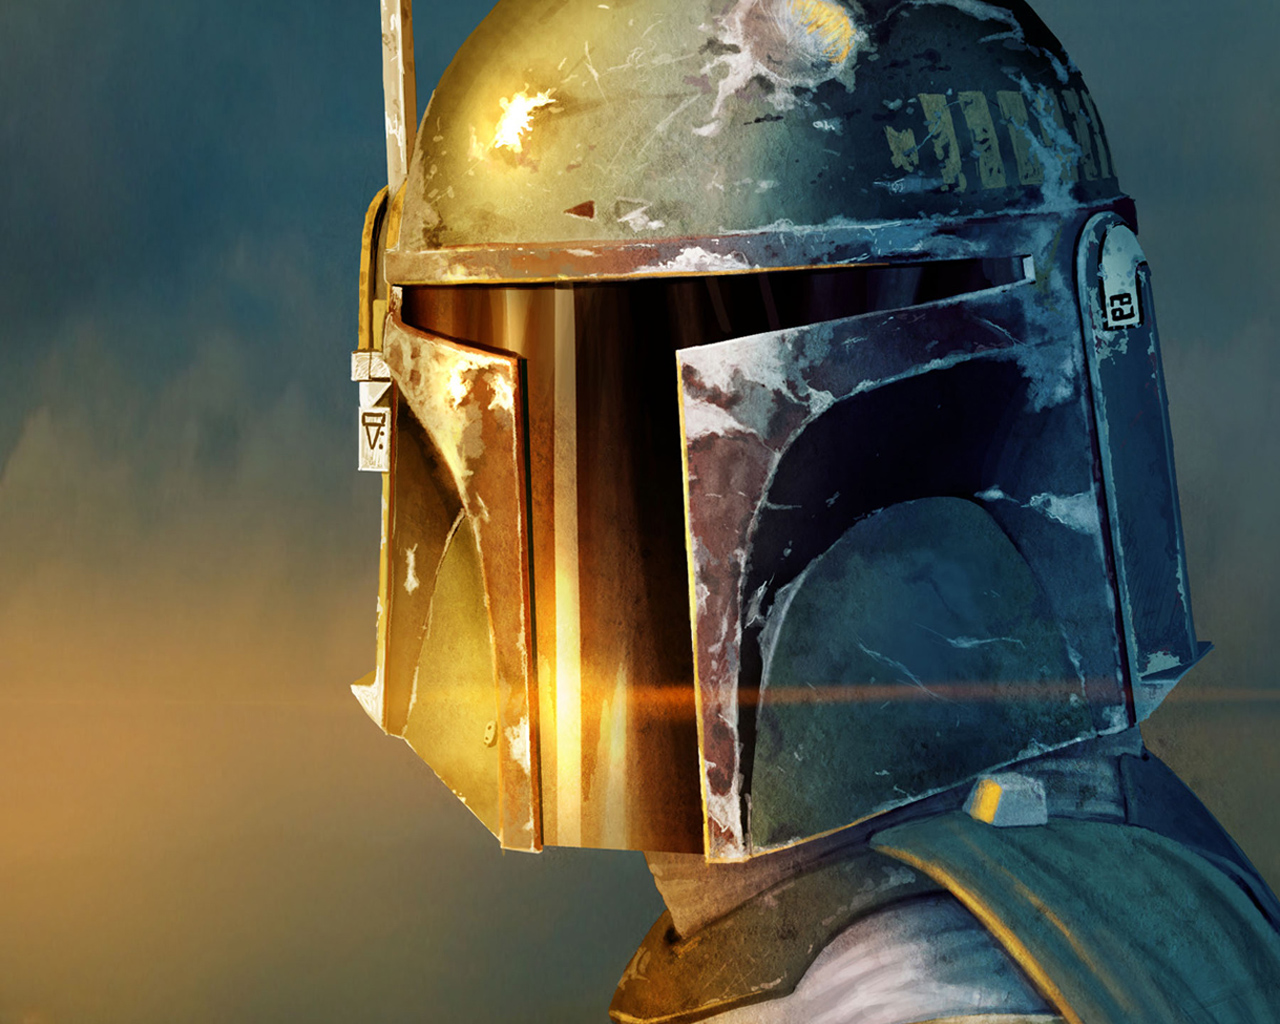 Don't mess with the Fett, cause the Fett don't mess!!!